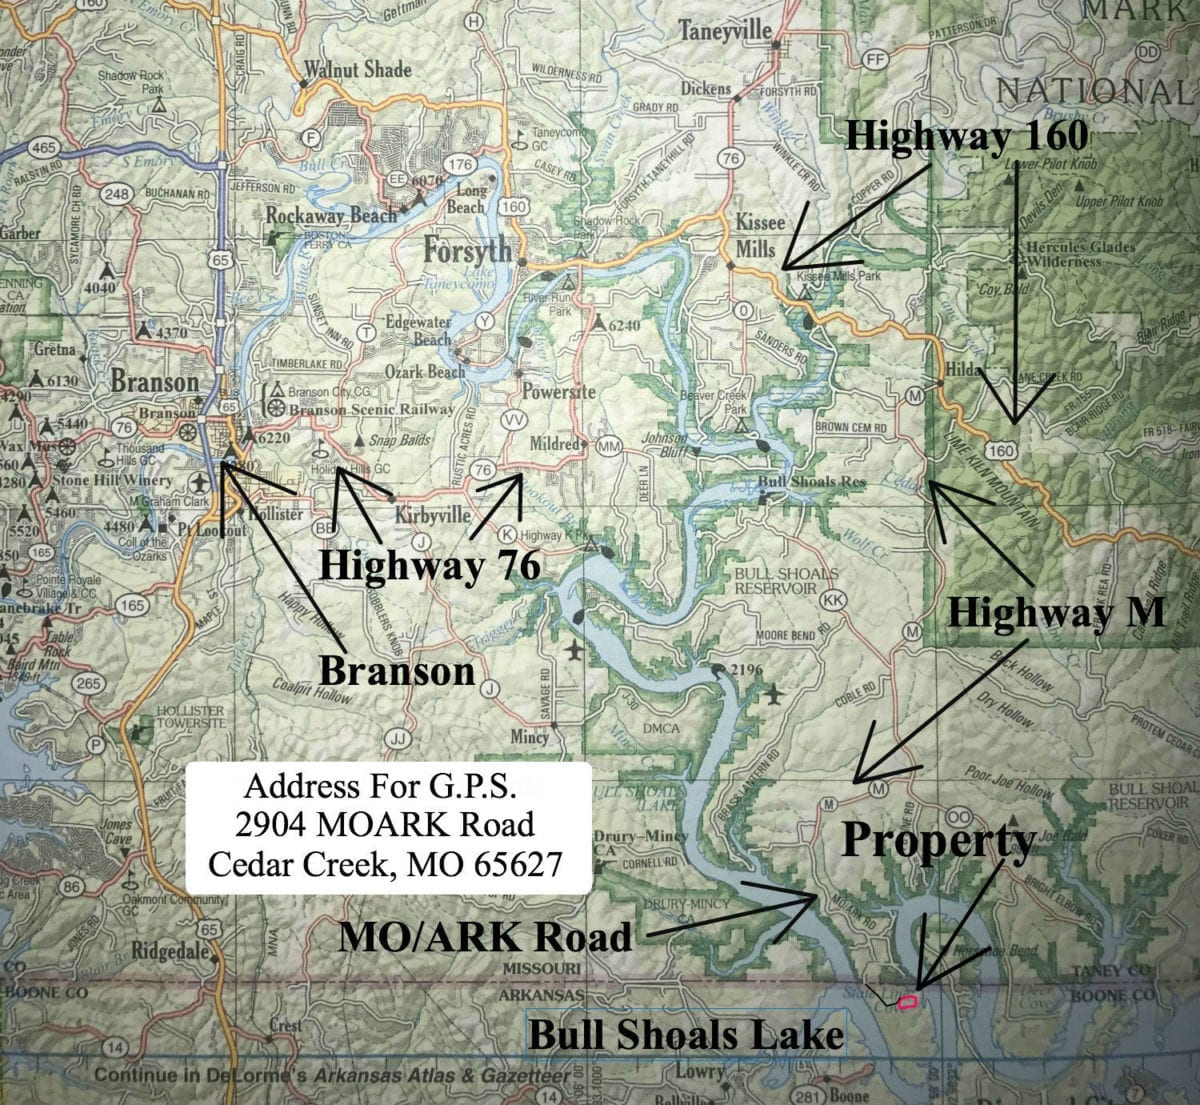 This helpful road map shows the route to the property from Branson, Missouri. Enter the address on this map into your G.P.S. and it should take you to the end of the paved road (Moark Road).